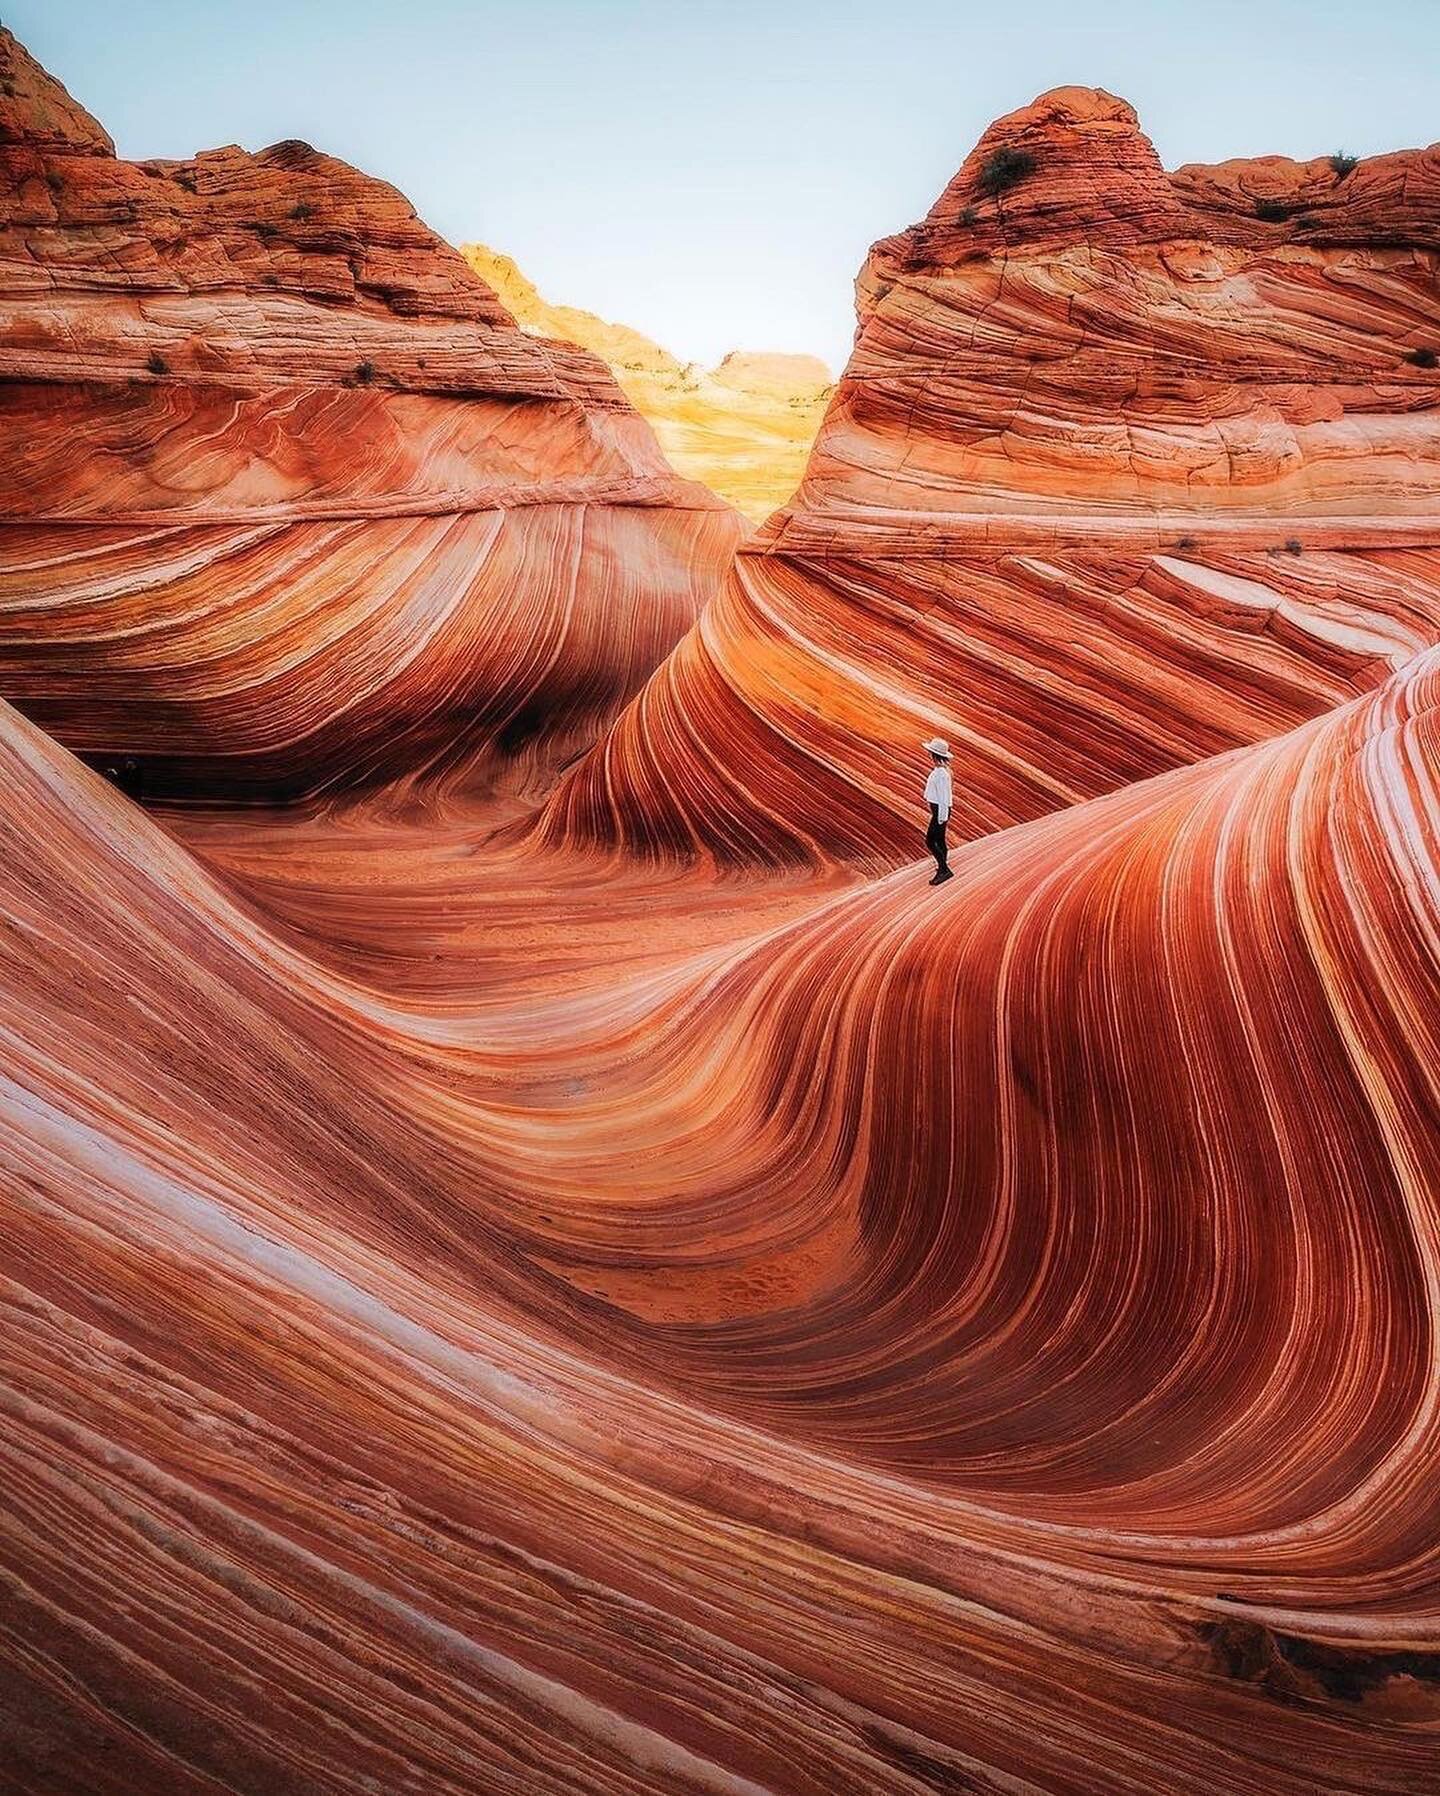 The Wave in Arizona. What an amazing rock formation 🇺🇸 
Photography // @eyeofshe
Curated by @steffeneisenacher

#thewave #wave #arizona #desert